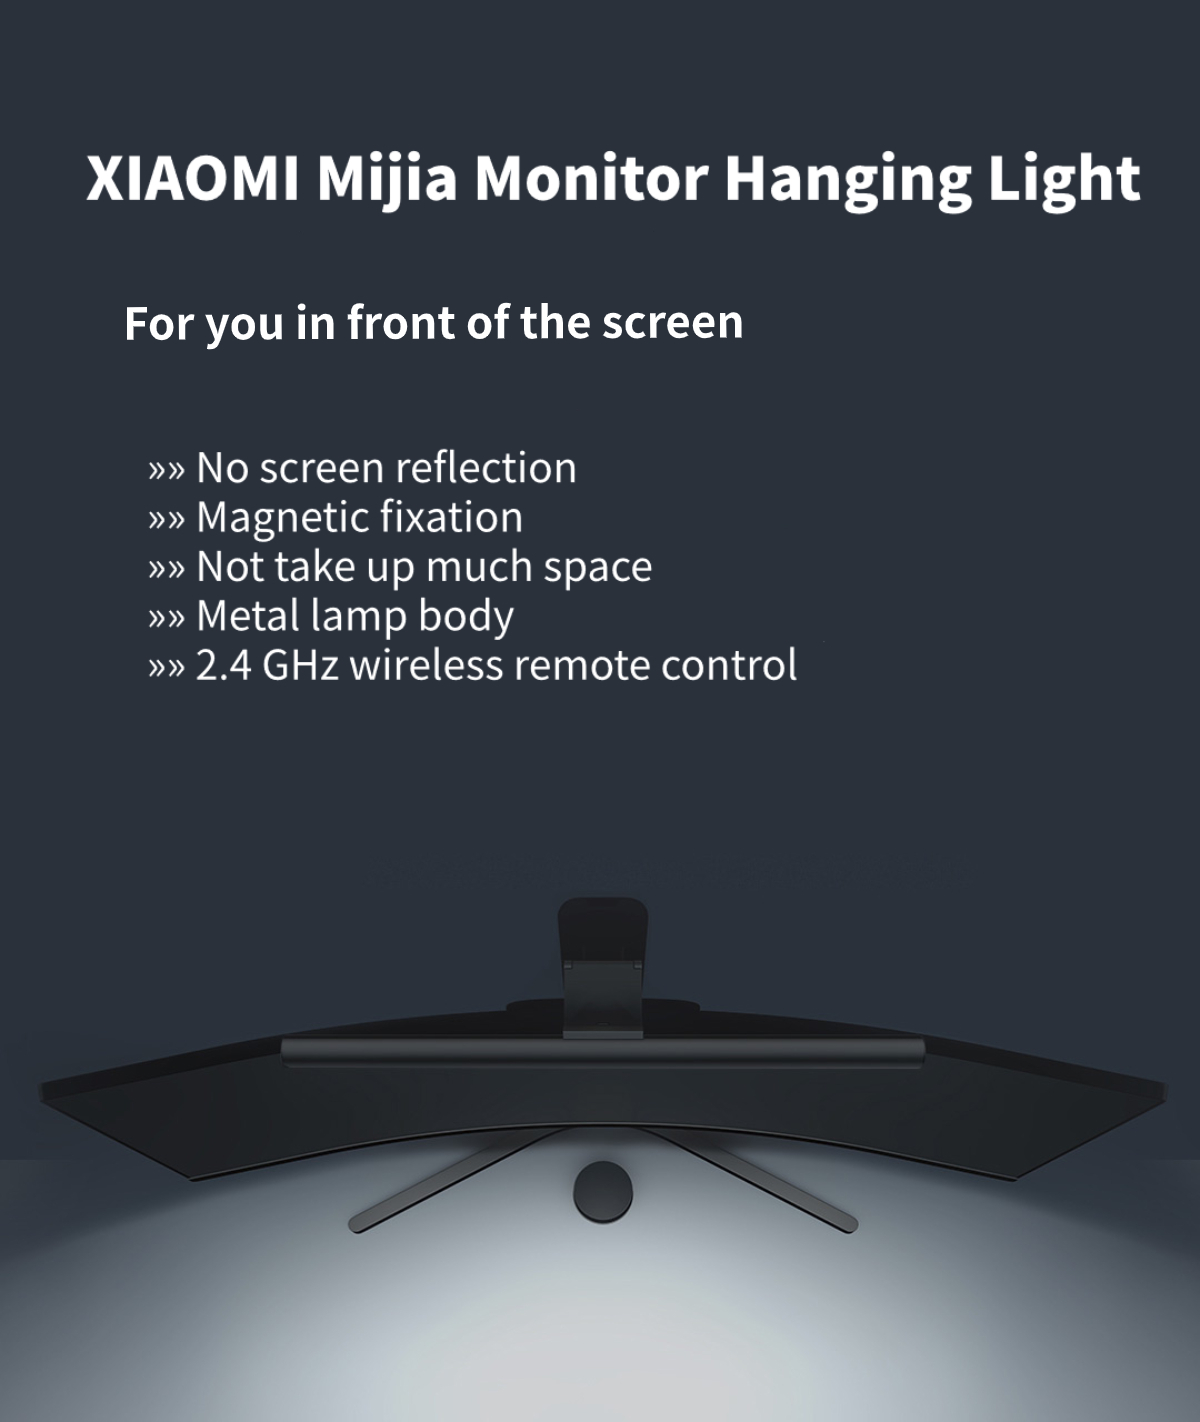 XIAOMI-Mi-Computer-Monitor-Light-Bar-Eyes-Protection-Reading-Dimmable-PC-Computer-USB-Lamp-Display-H-1690642-1